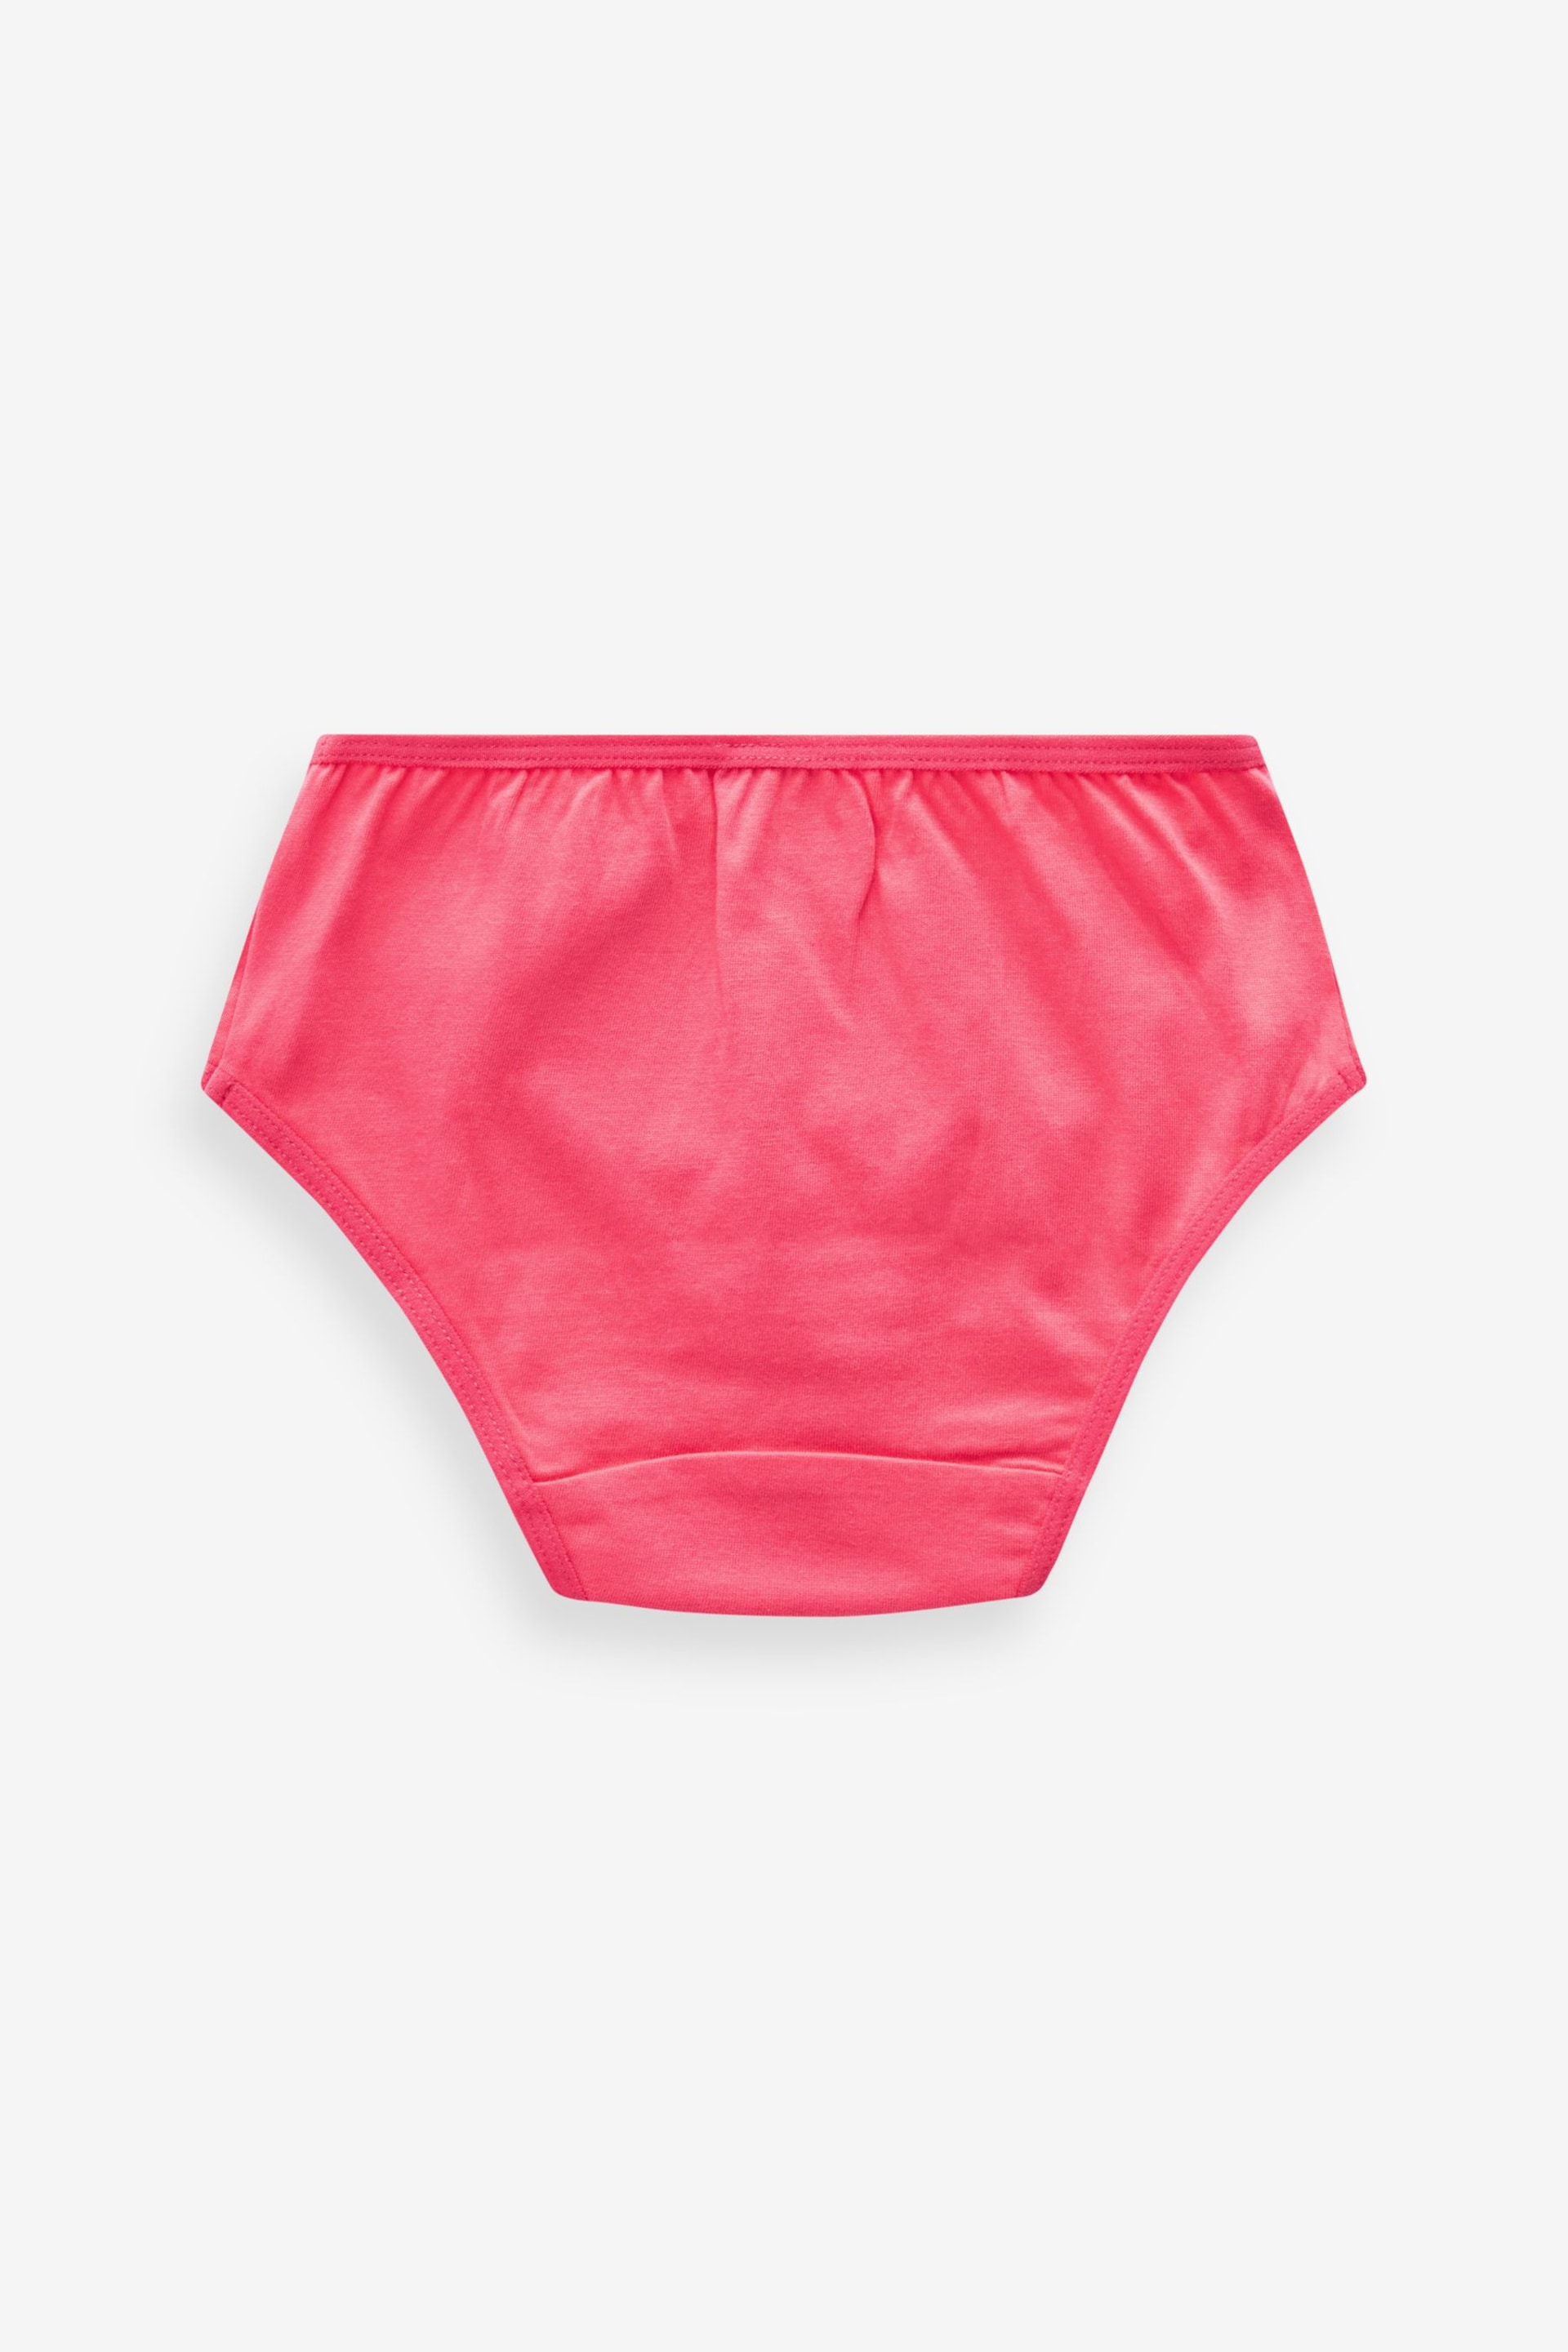 Red/Green Squishmallow Briefs 5 Pack (5-14yrs) - Image 2 of 3